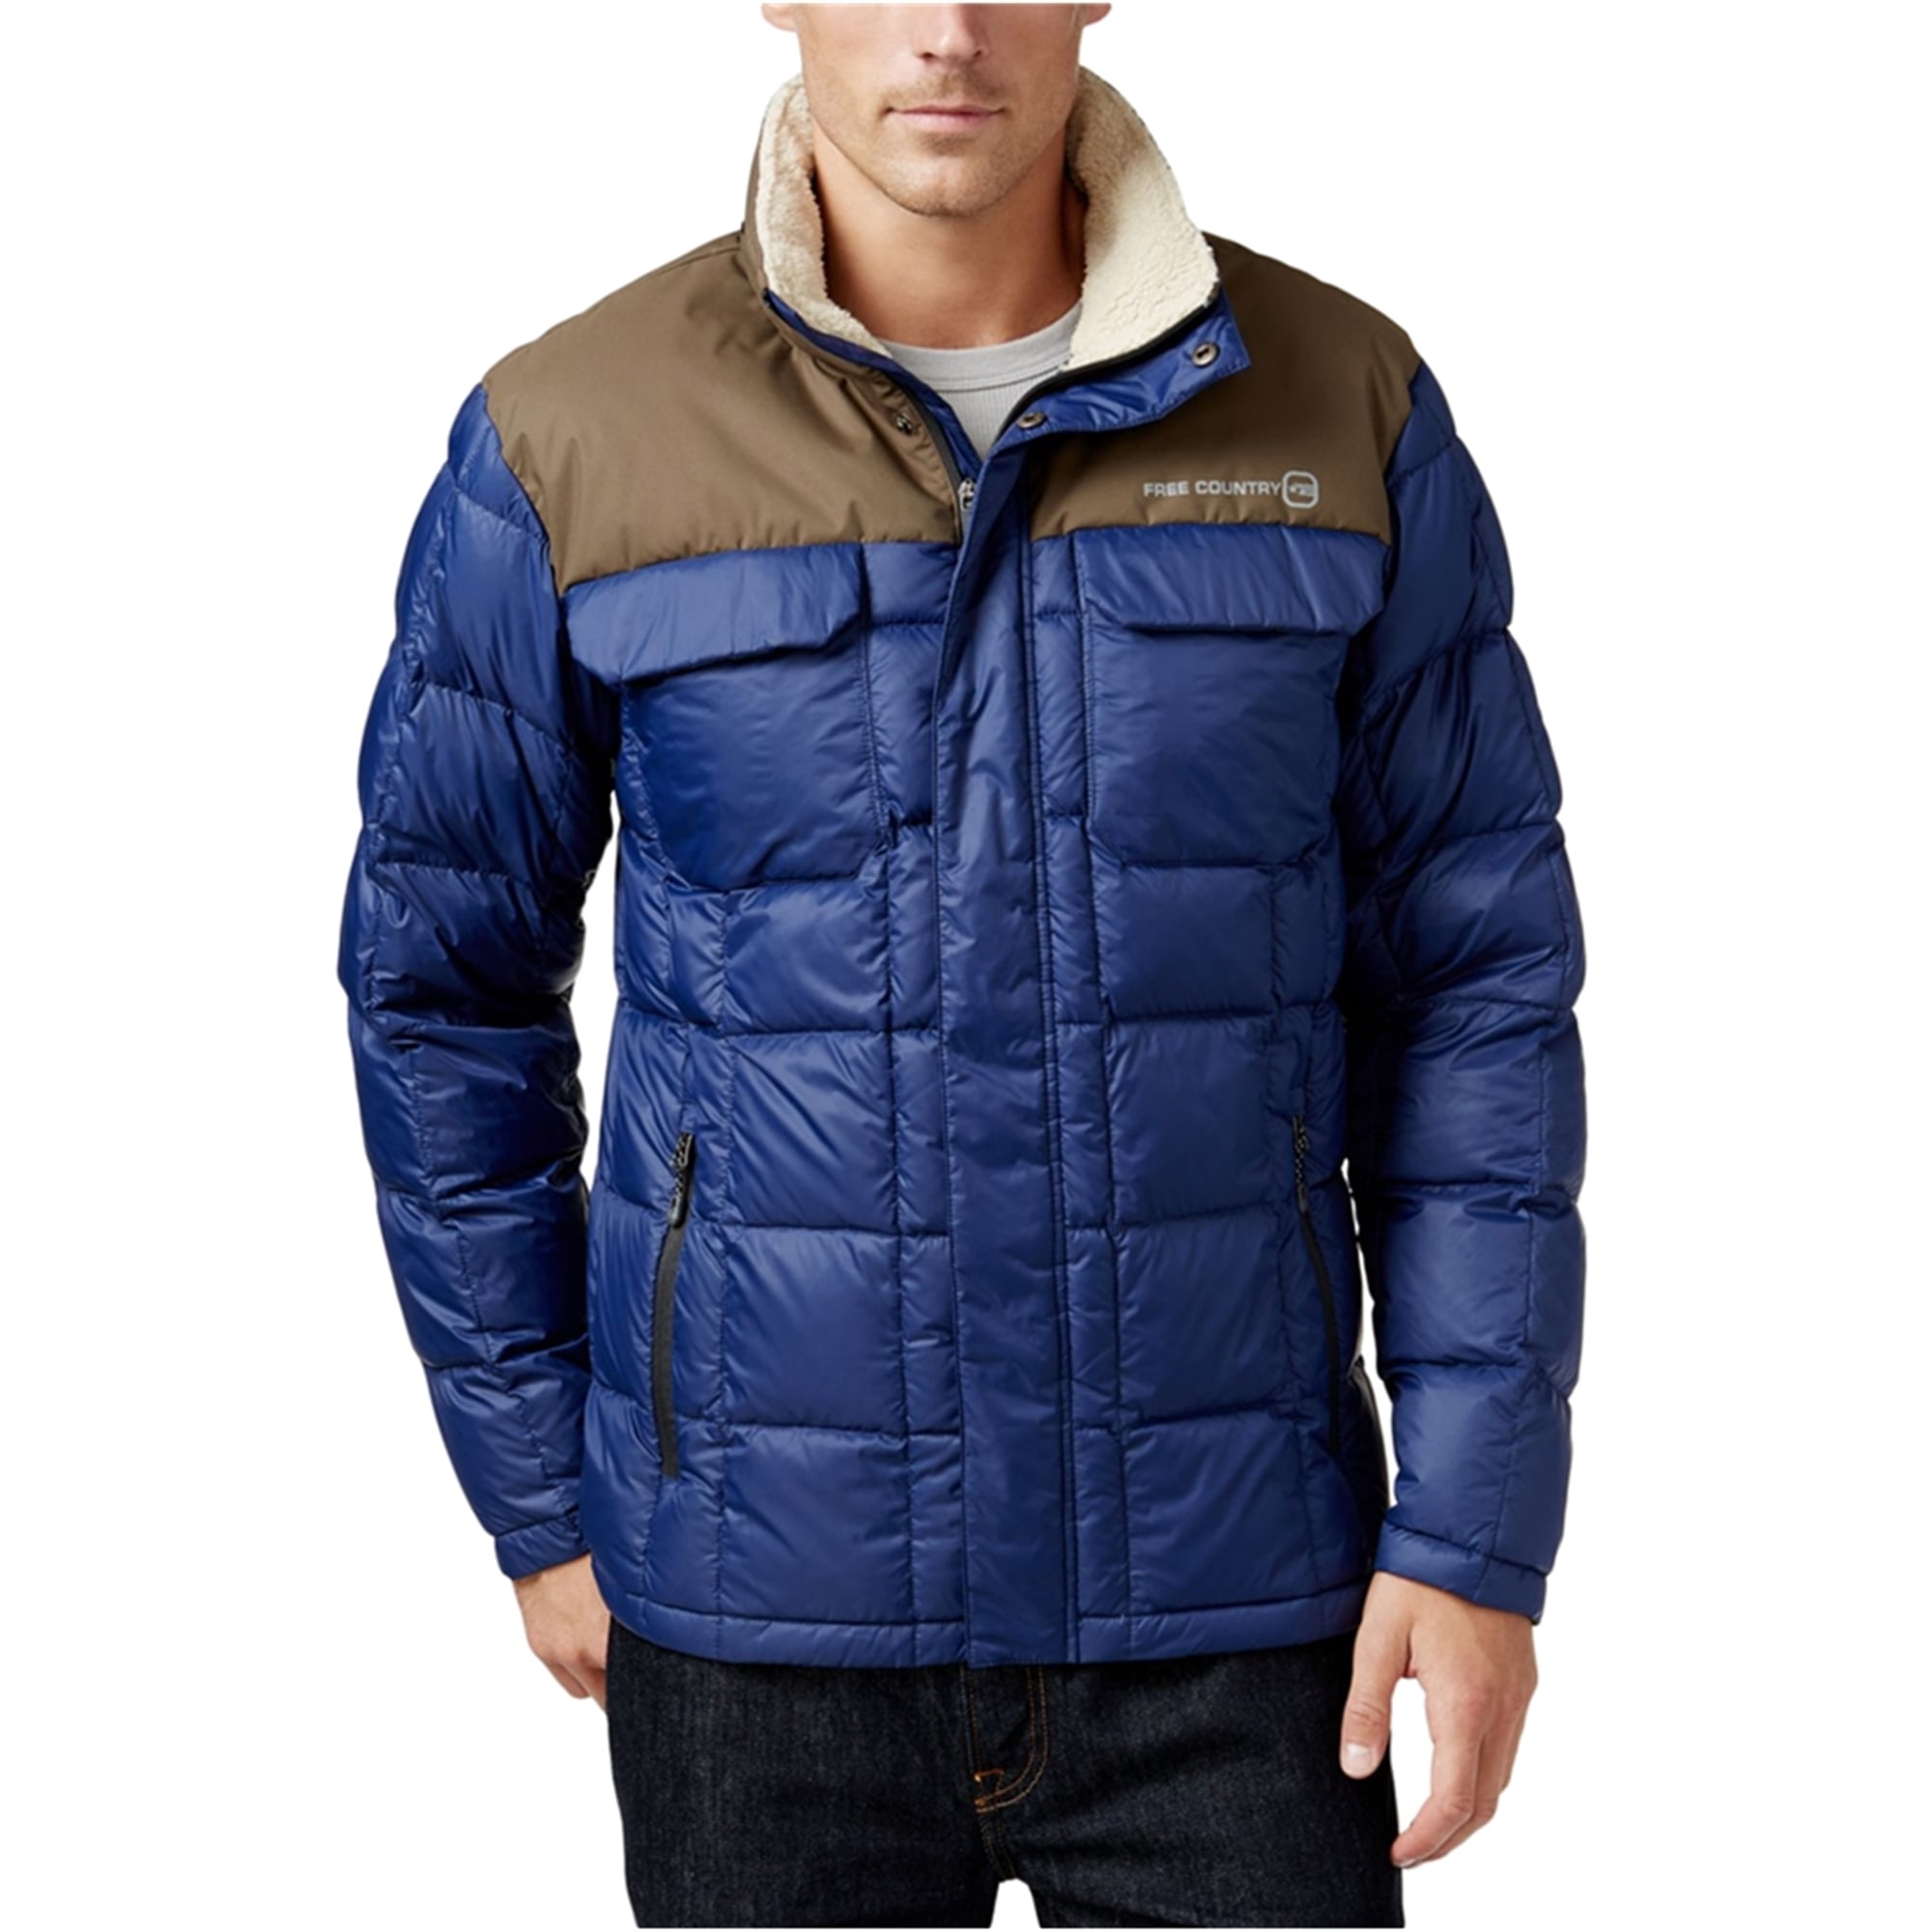 Free Country Mens Down Puffer Jacket, Blue, XX-Large - Walmart.com